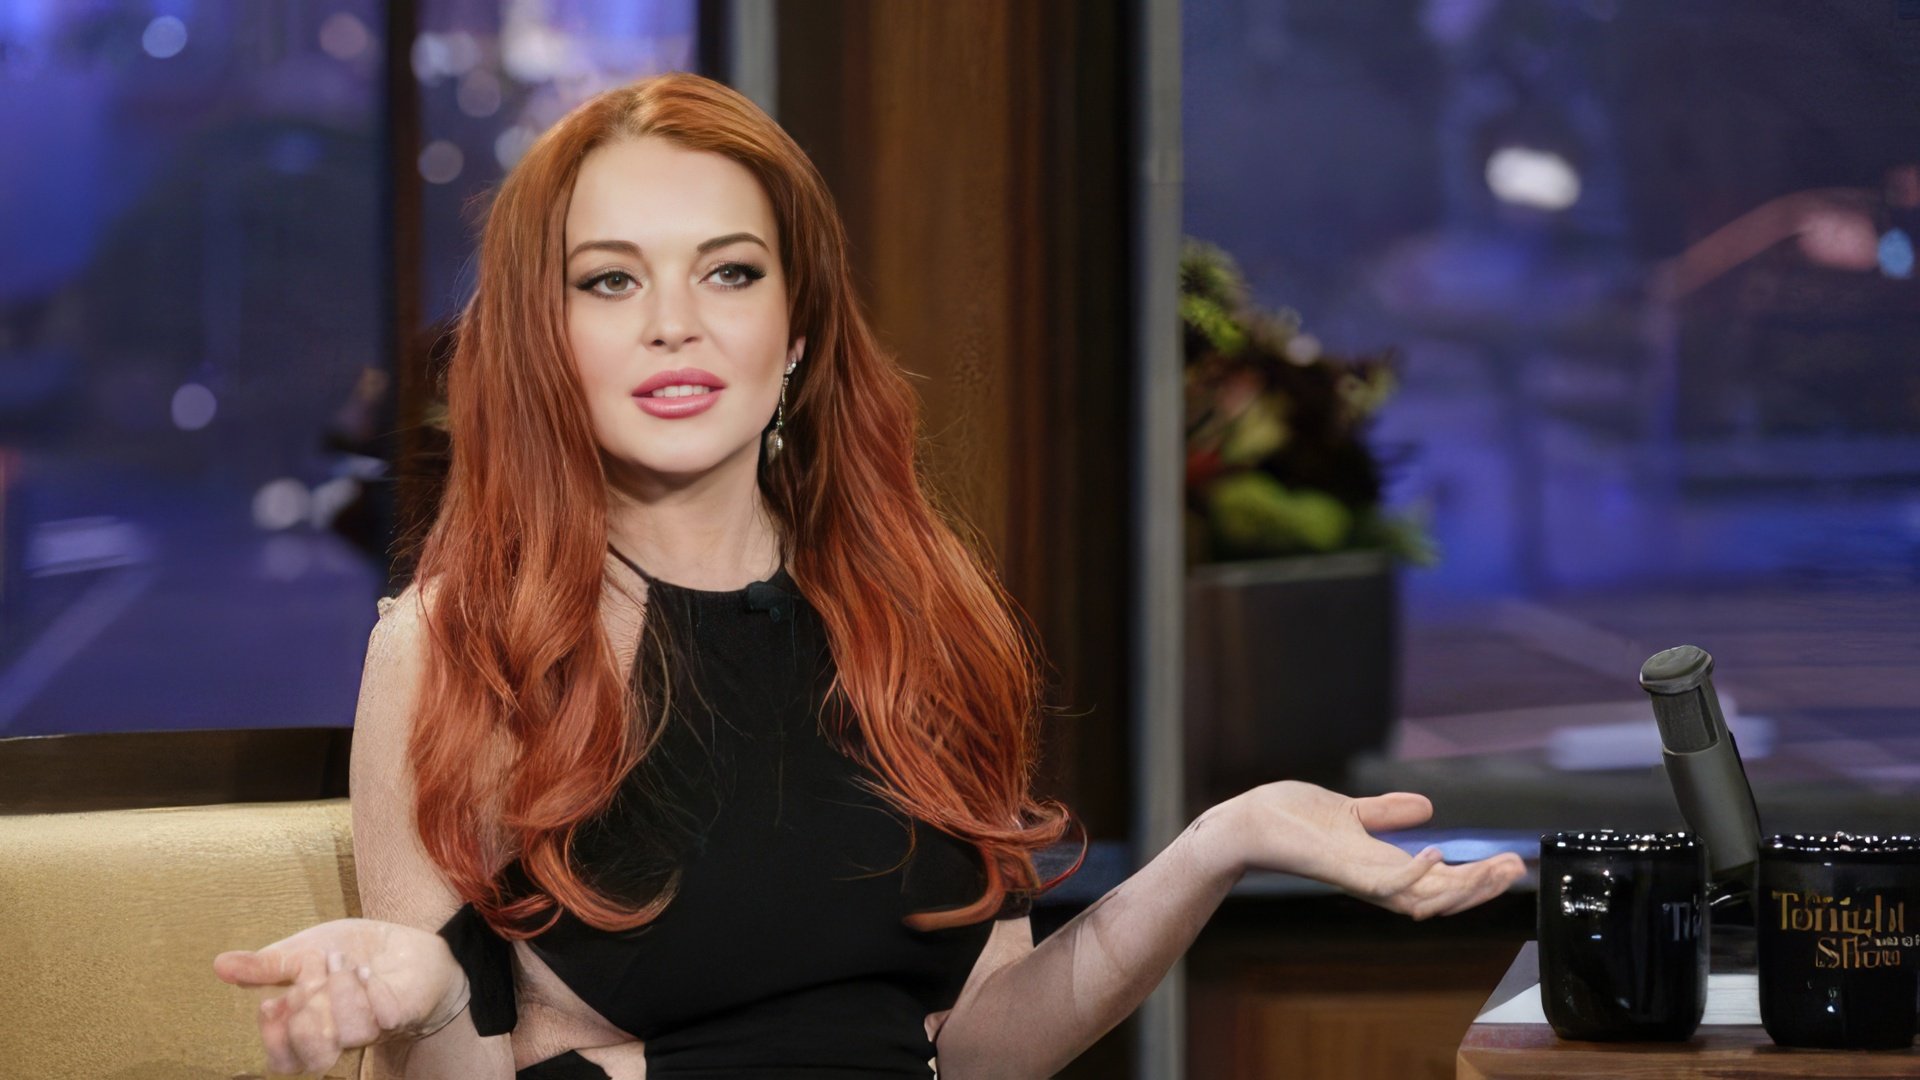 Lindsay Lohan made the list of her lovers herself